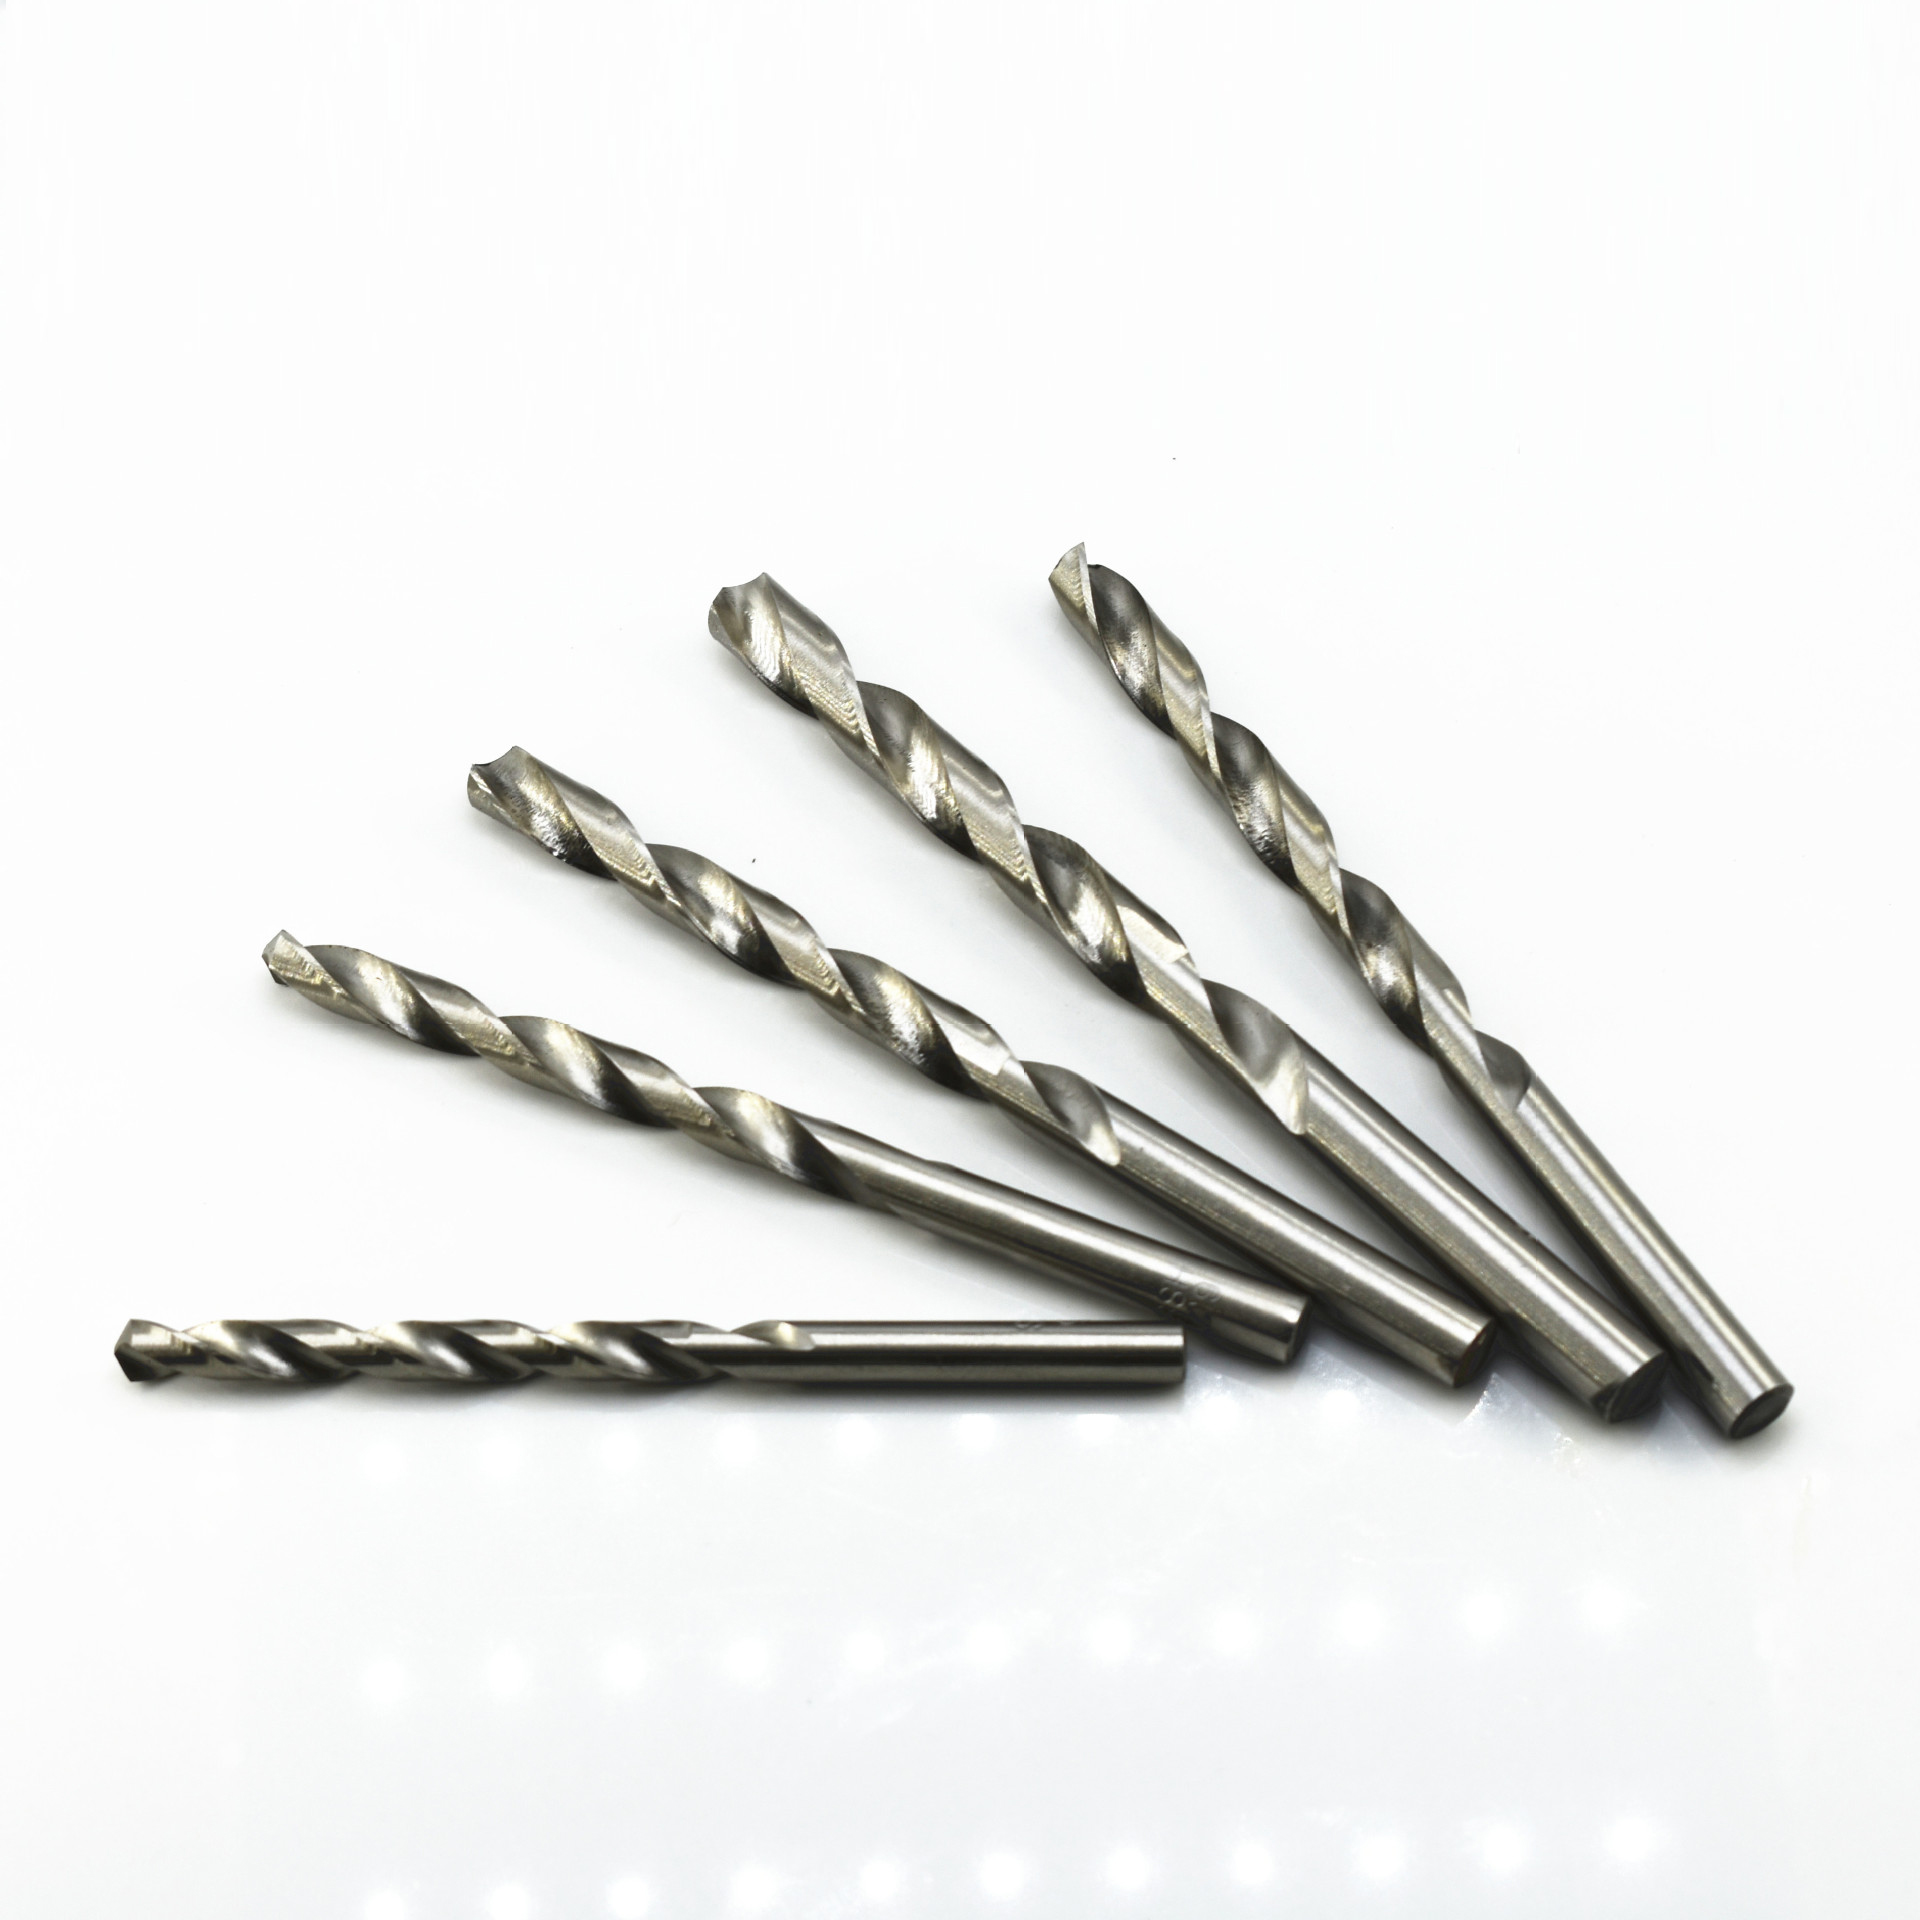 High-Quality Drill Bit - Achieve Precise and Clean Drilling Results